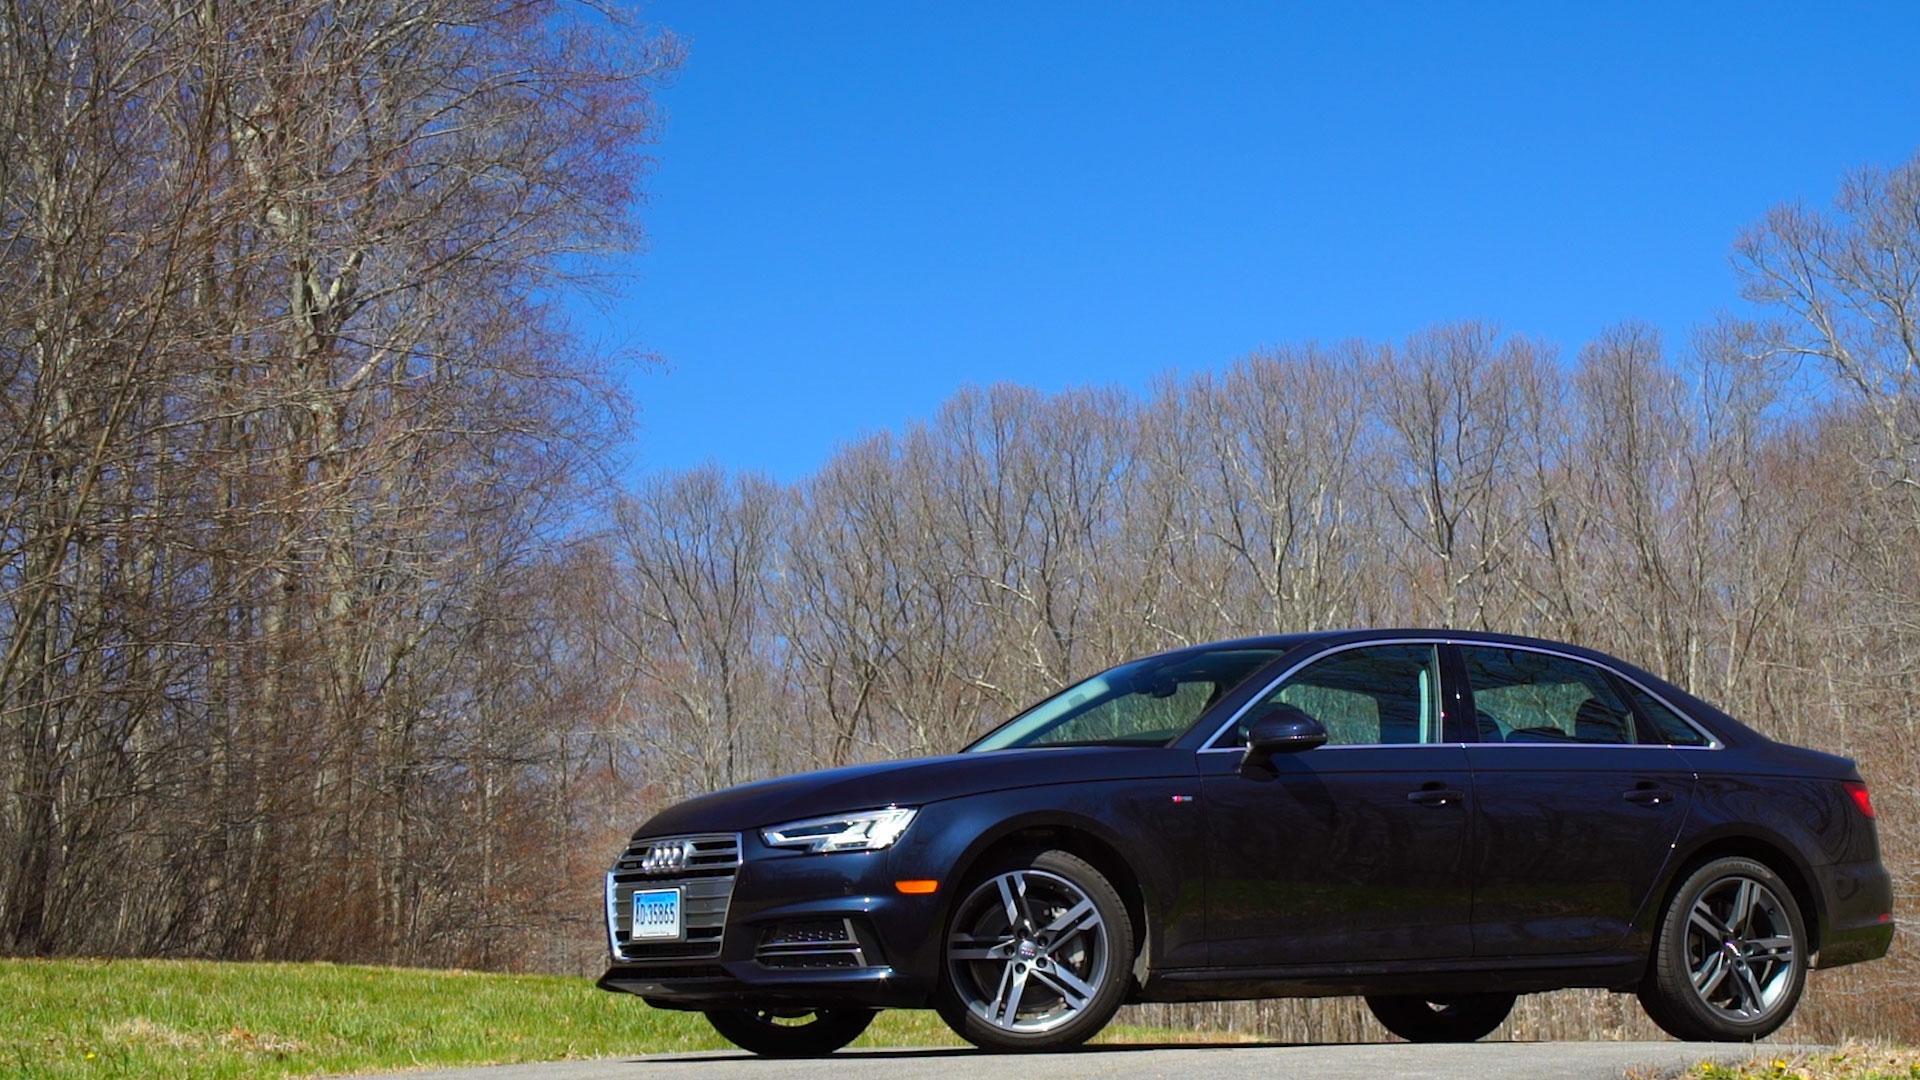 2019 Audi A4 Prices & Inventory - Consumer Reports